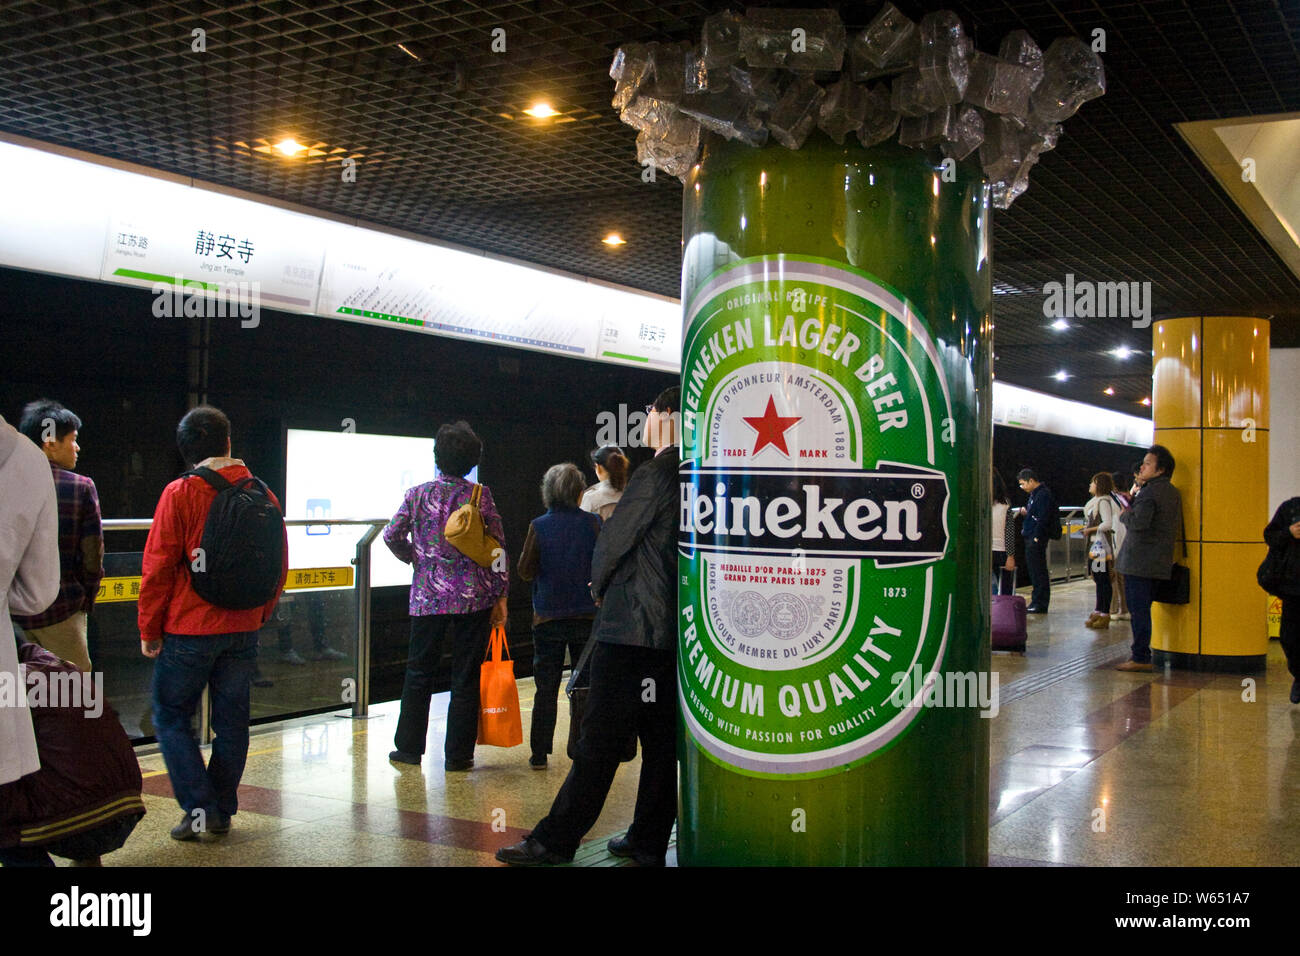 --FILE--Passengers wait for subway trains next to an advertisement for Heineken Lager Beer at a metro station in Shanghai, China, 2 November 2012.   H Stock Photo